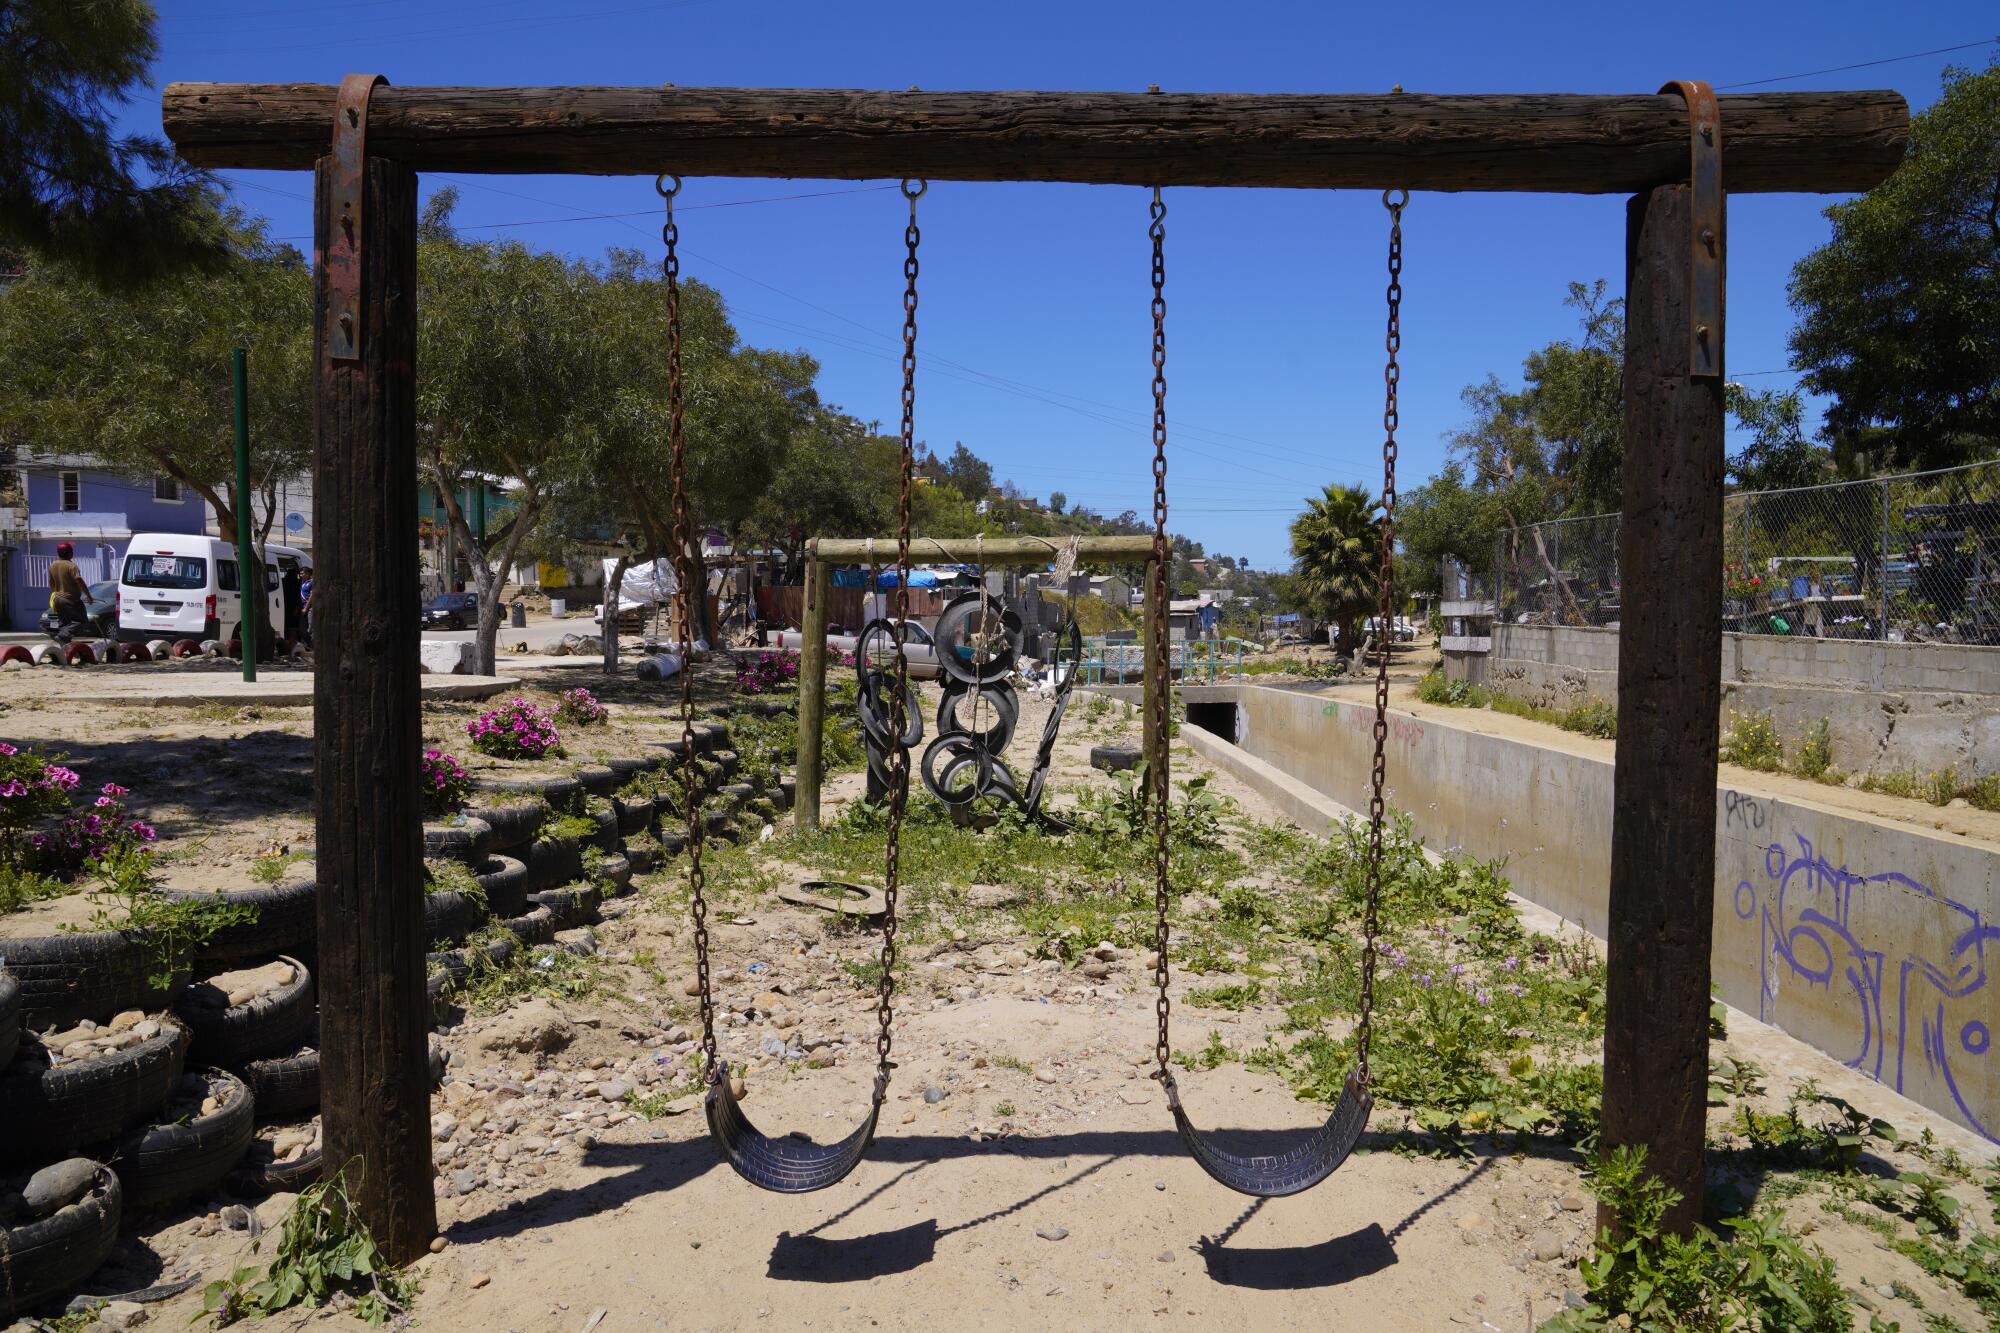 Local nonprofit Wildcoast built a children's park in Los Laureles Canyon using recycled materials.